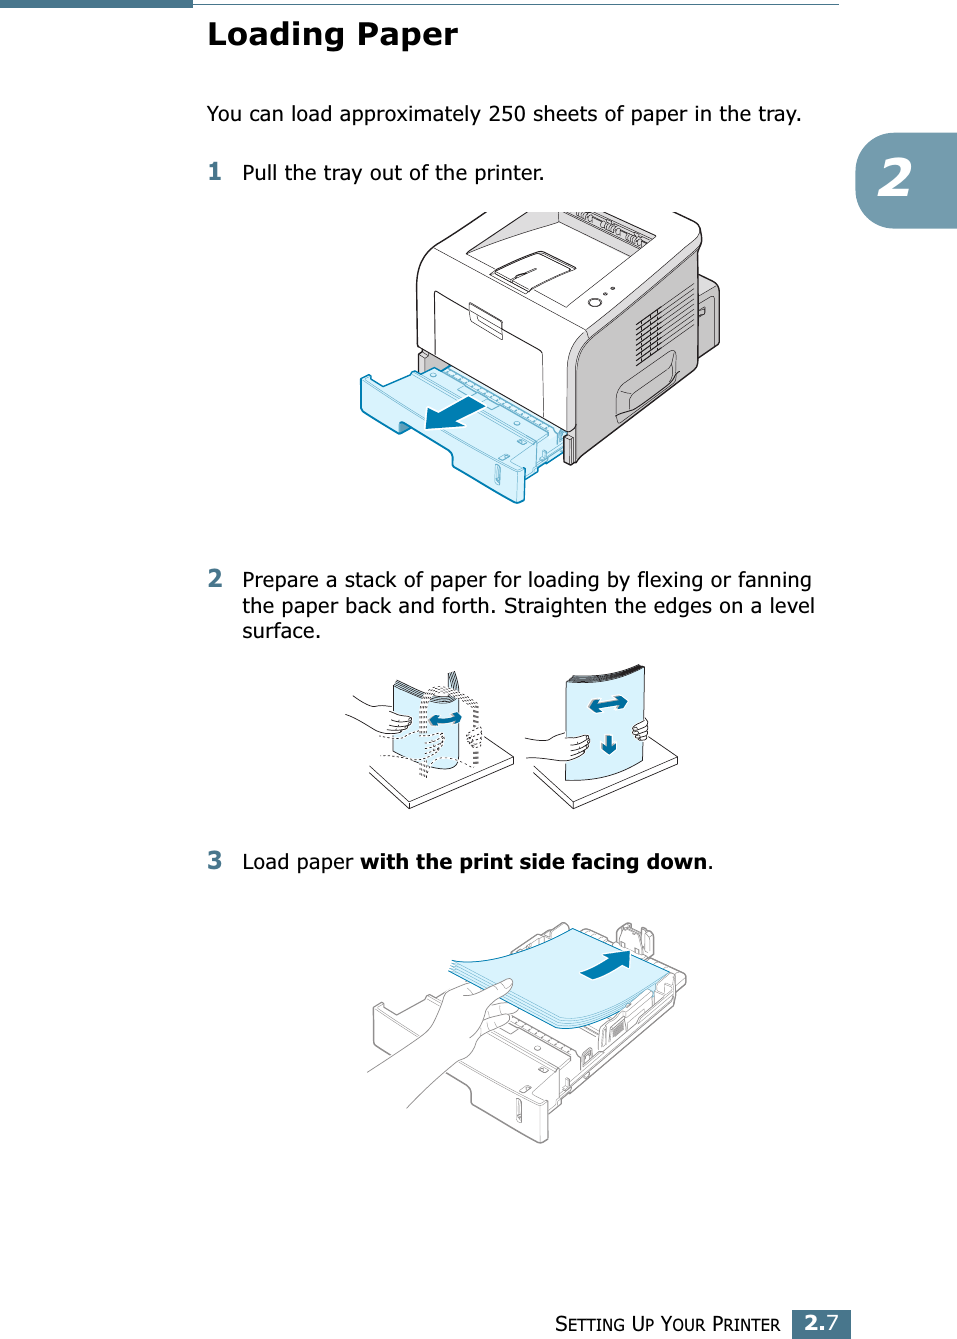 SETTING UP YOUR PRINTER2.72Loading PaperYou can load approximately 250 sheets of paper in the tray.1Pull the tray out of the printer.2Prepare a stack of paper for loading by flexing or fanning the paper back and forth. Straighten the edges on a level surface.3Load paper with the print side facing down. 